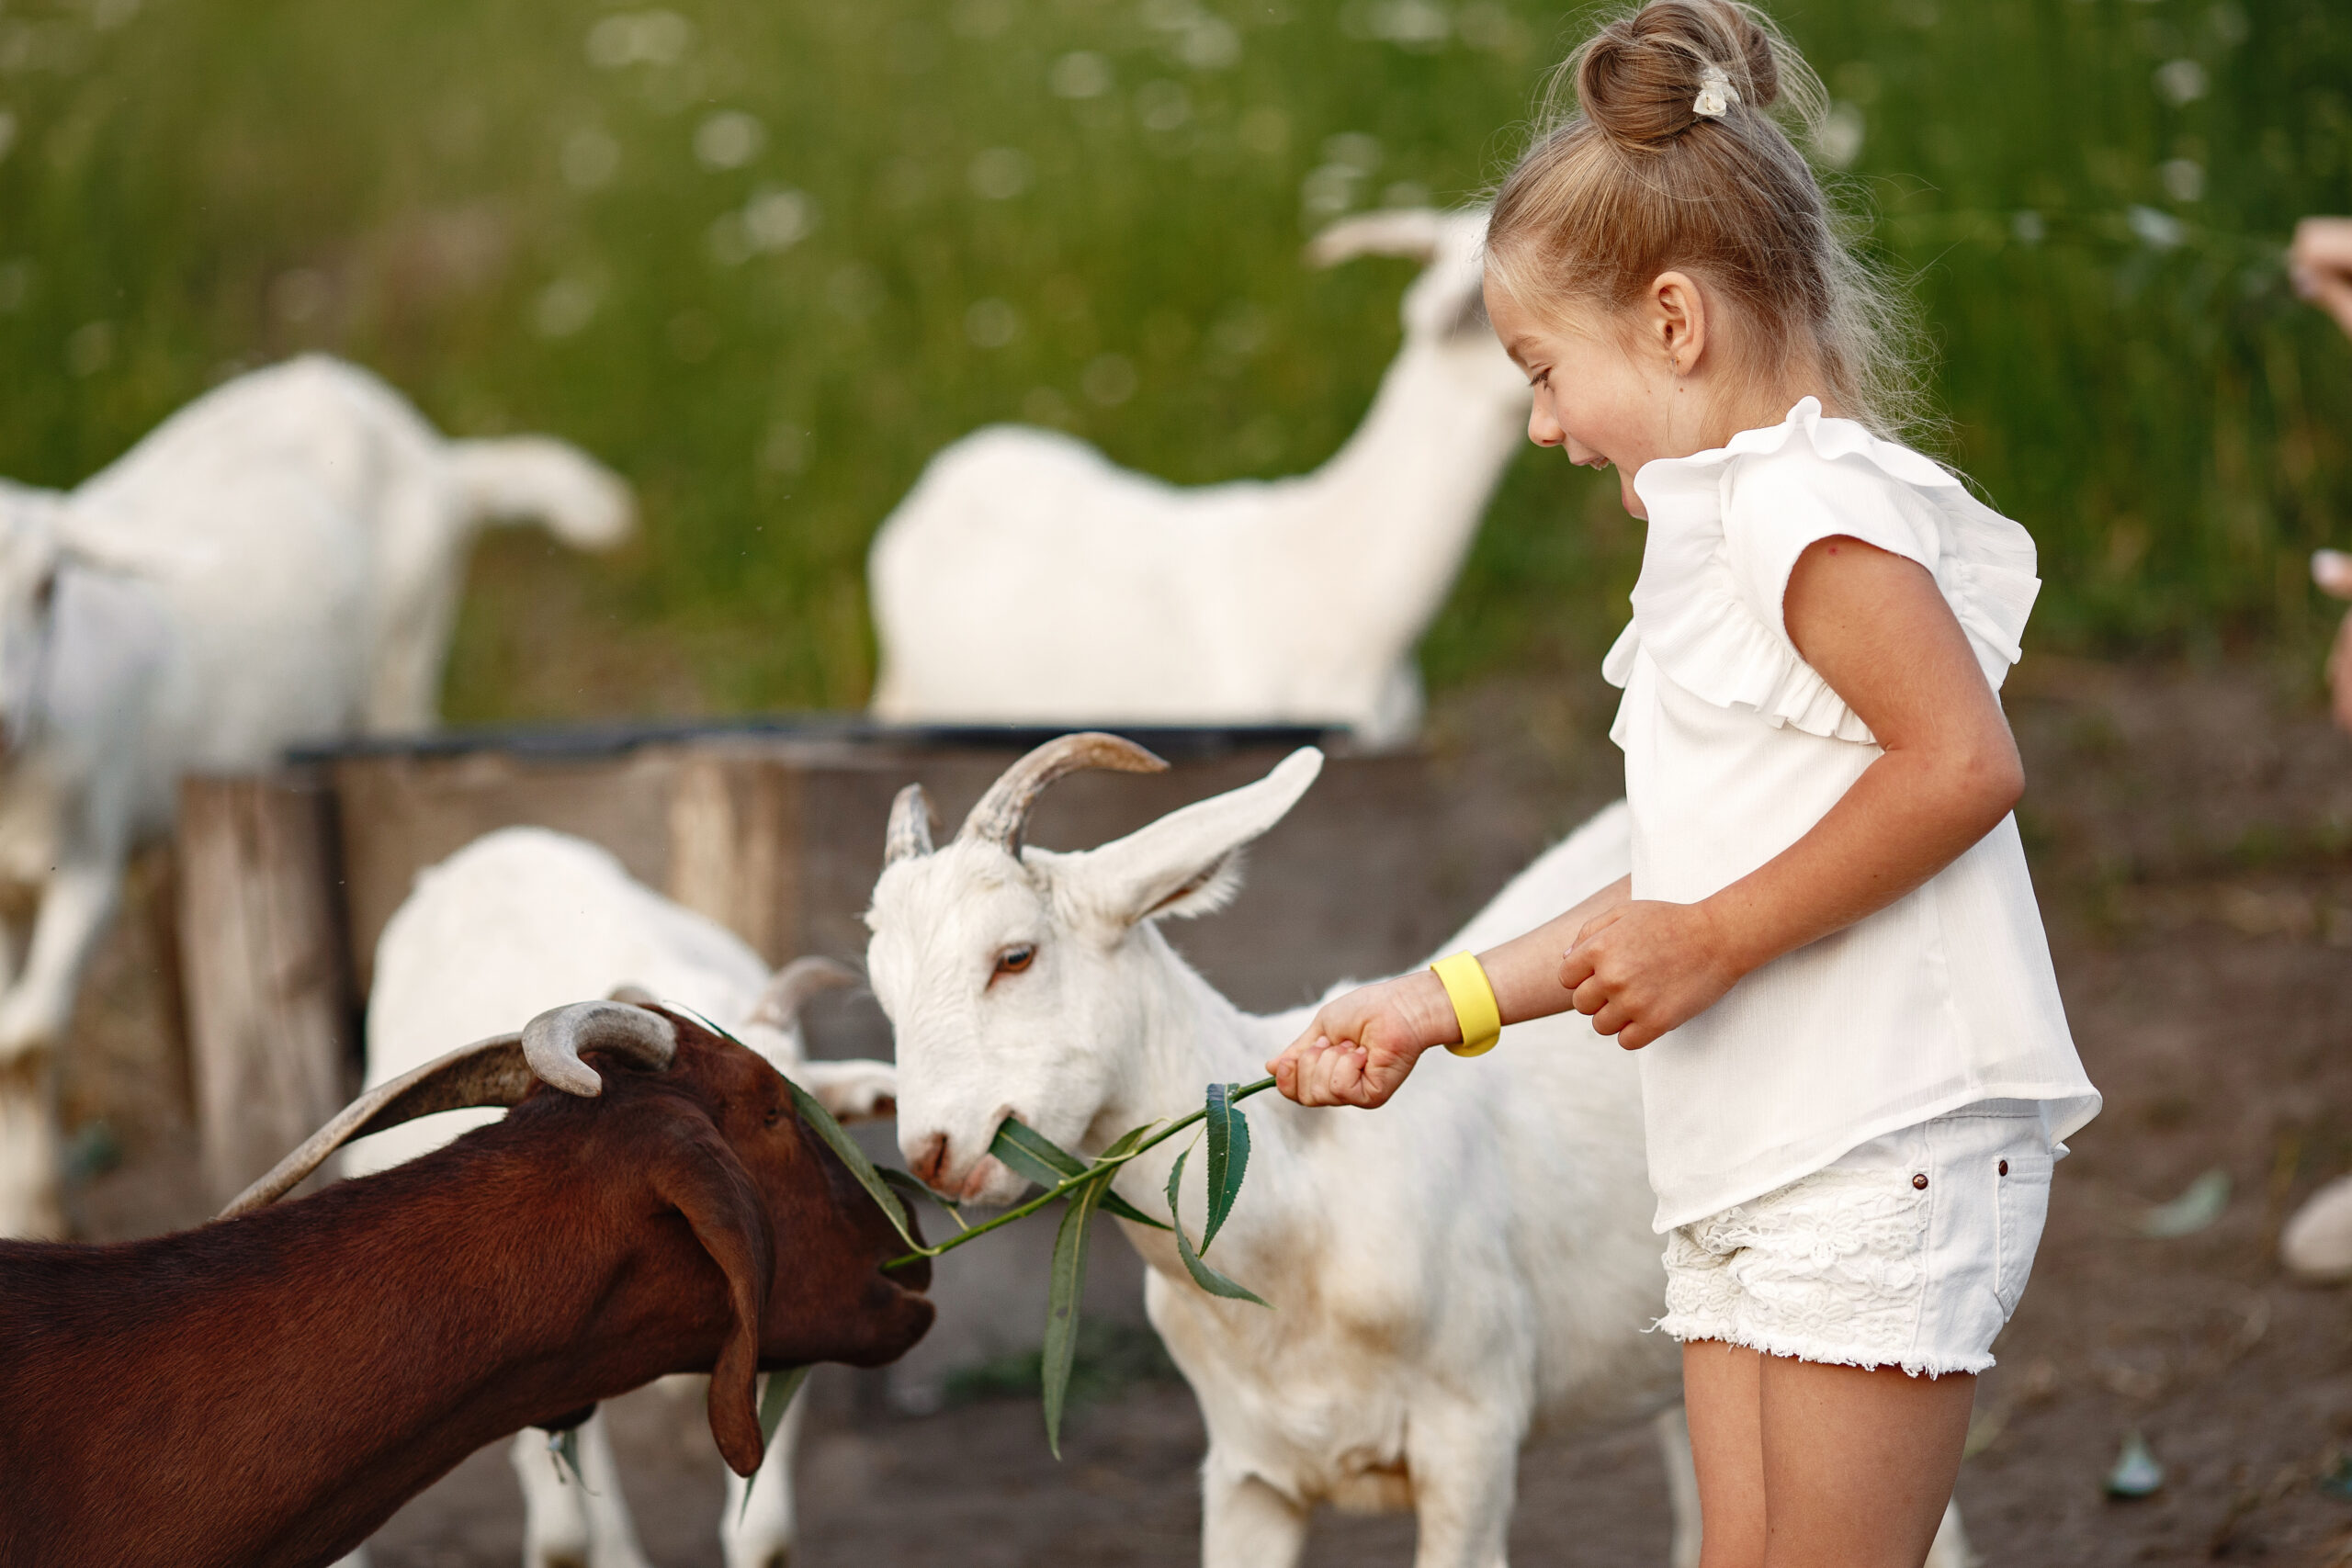 Girl feeds the goat with grass in nature.